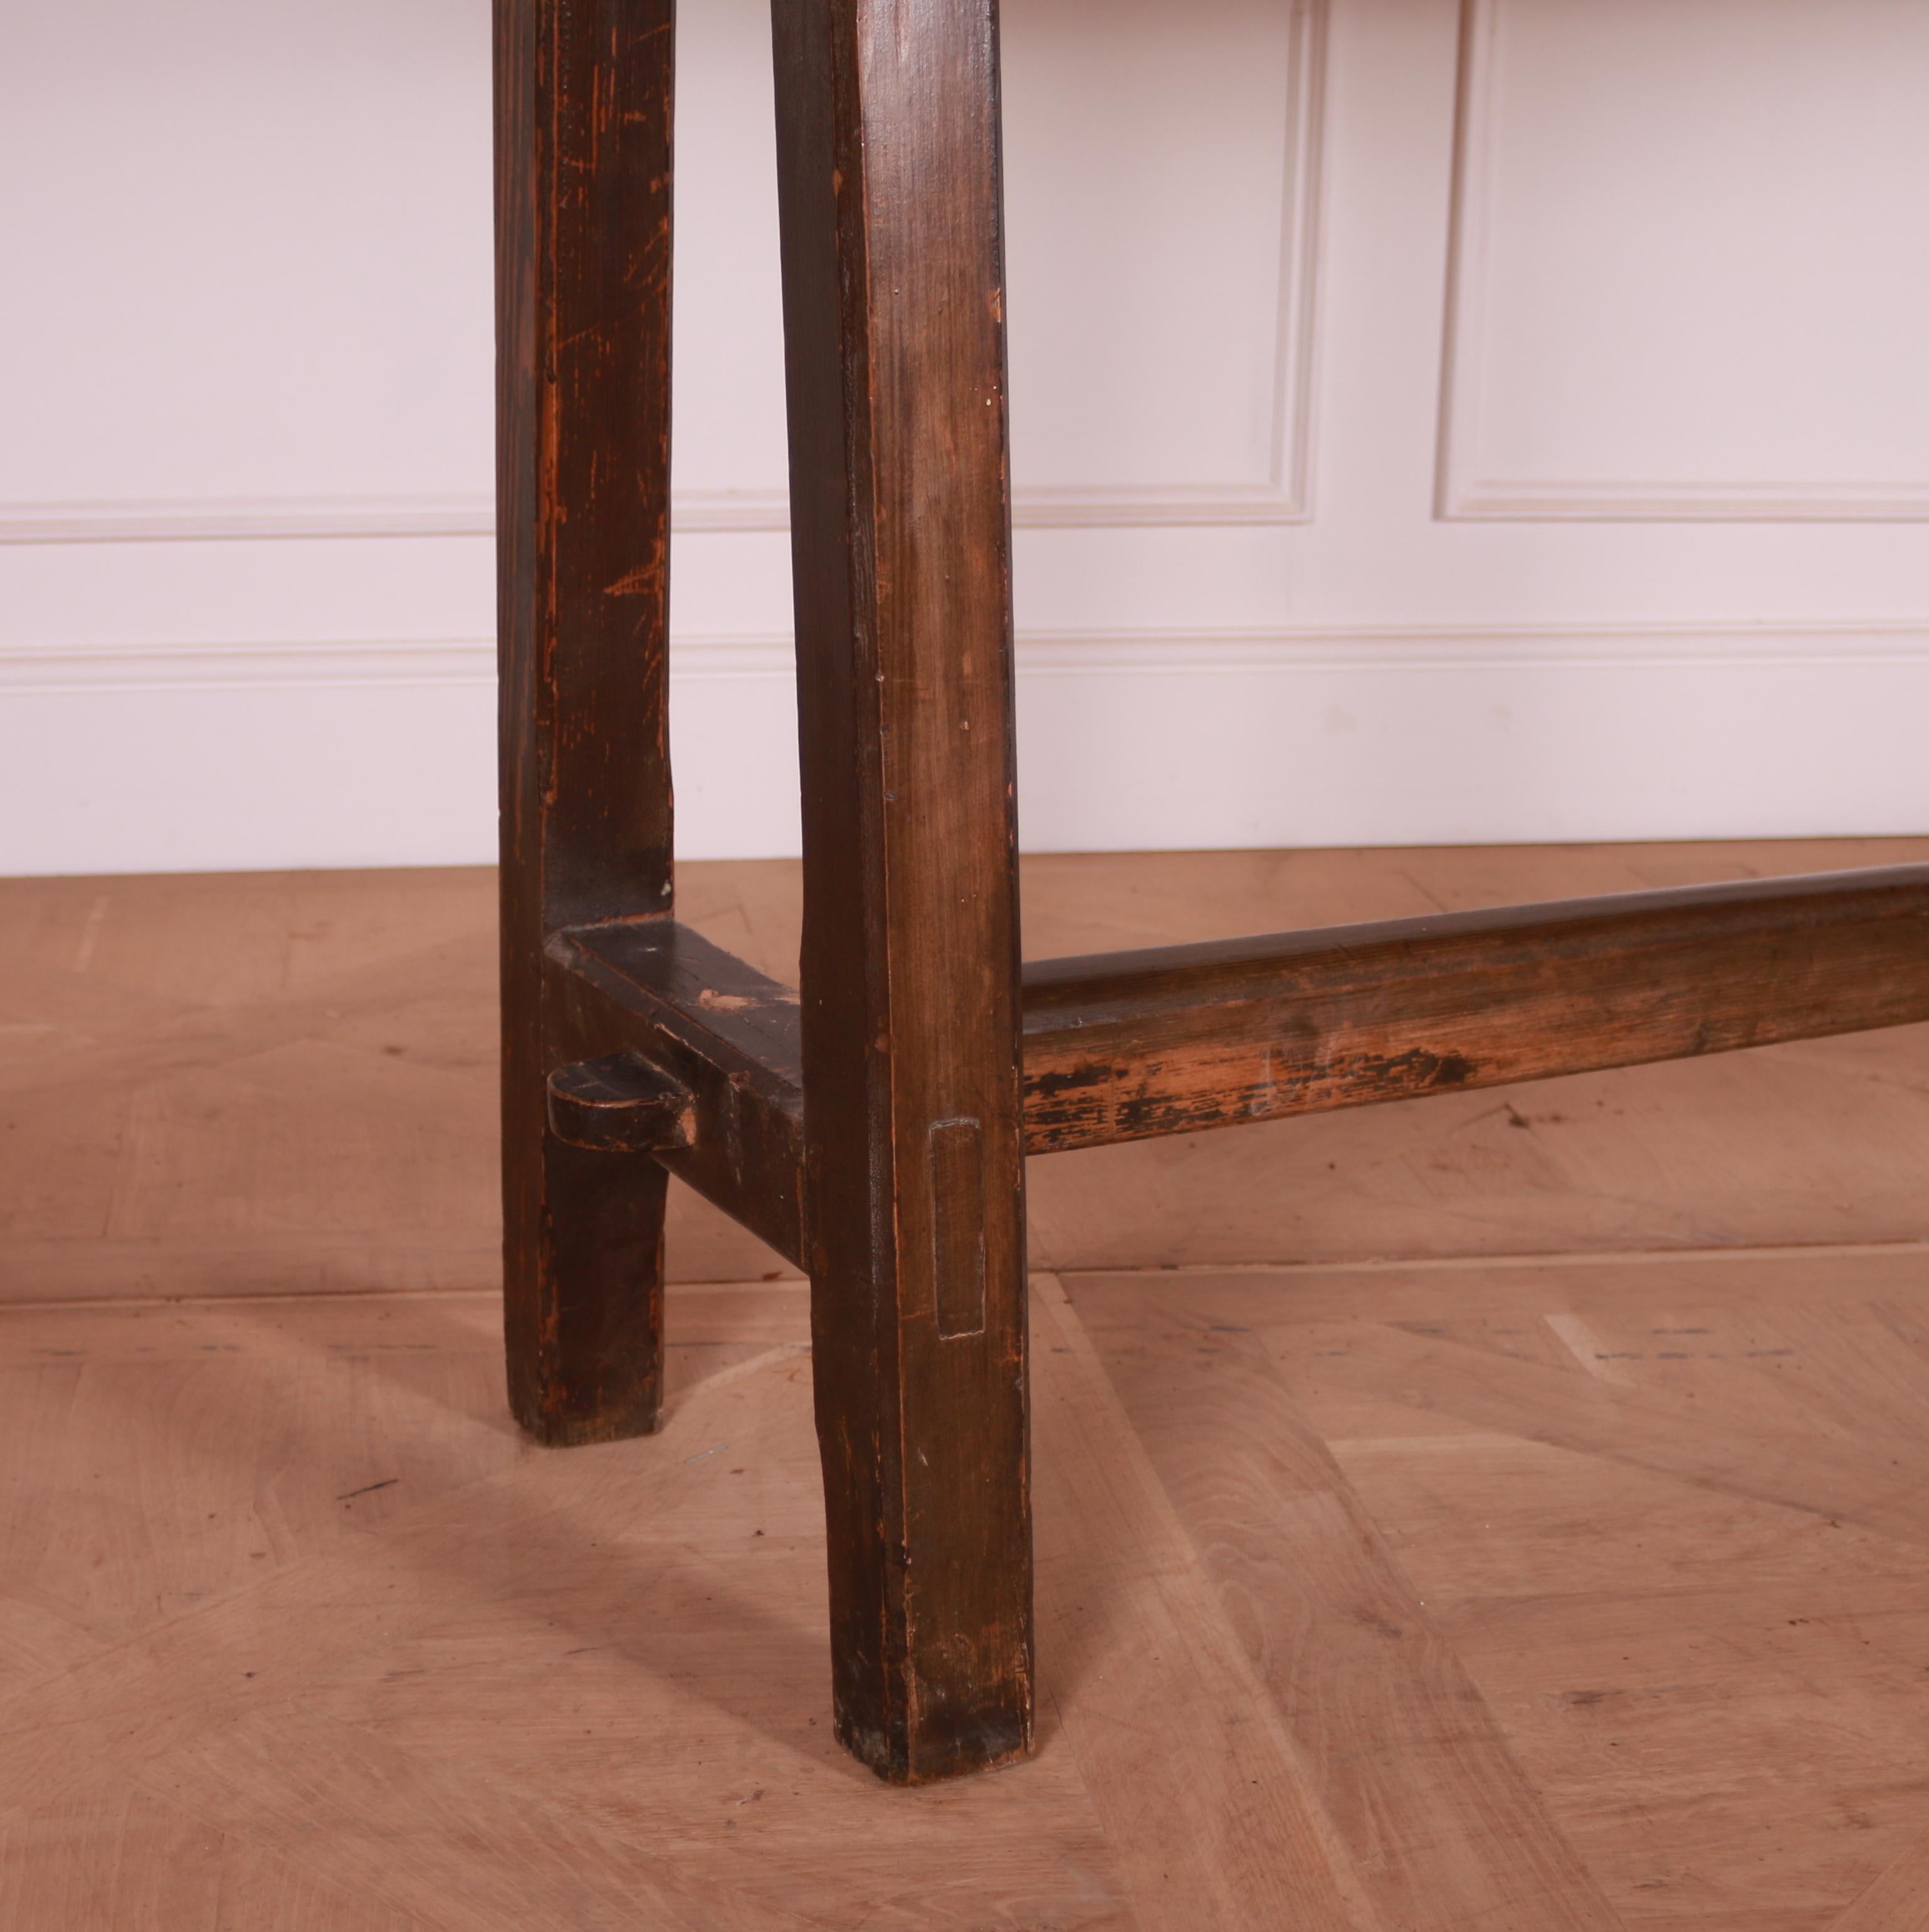 Large 19th C English pine trestle table with a scrubbed top. 1880.

2